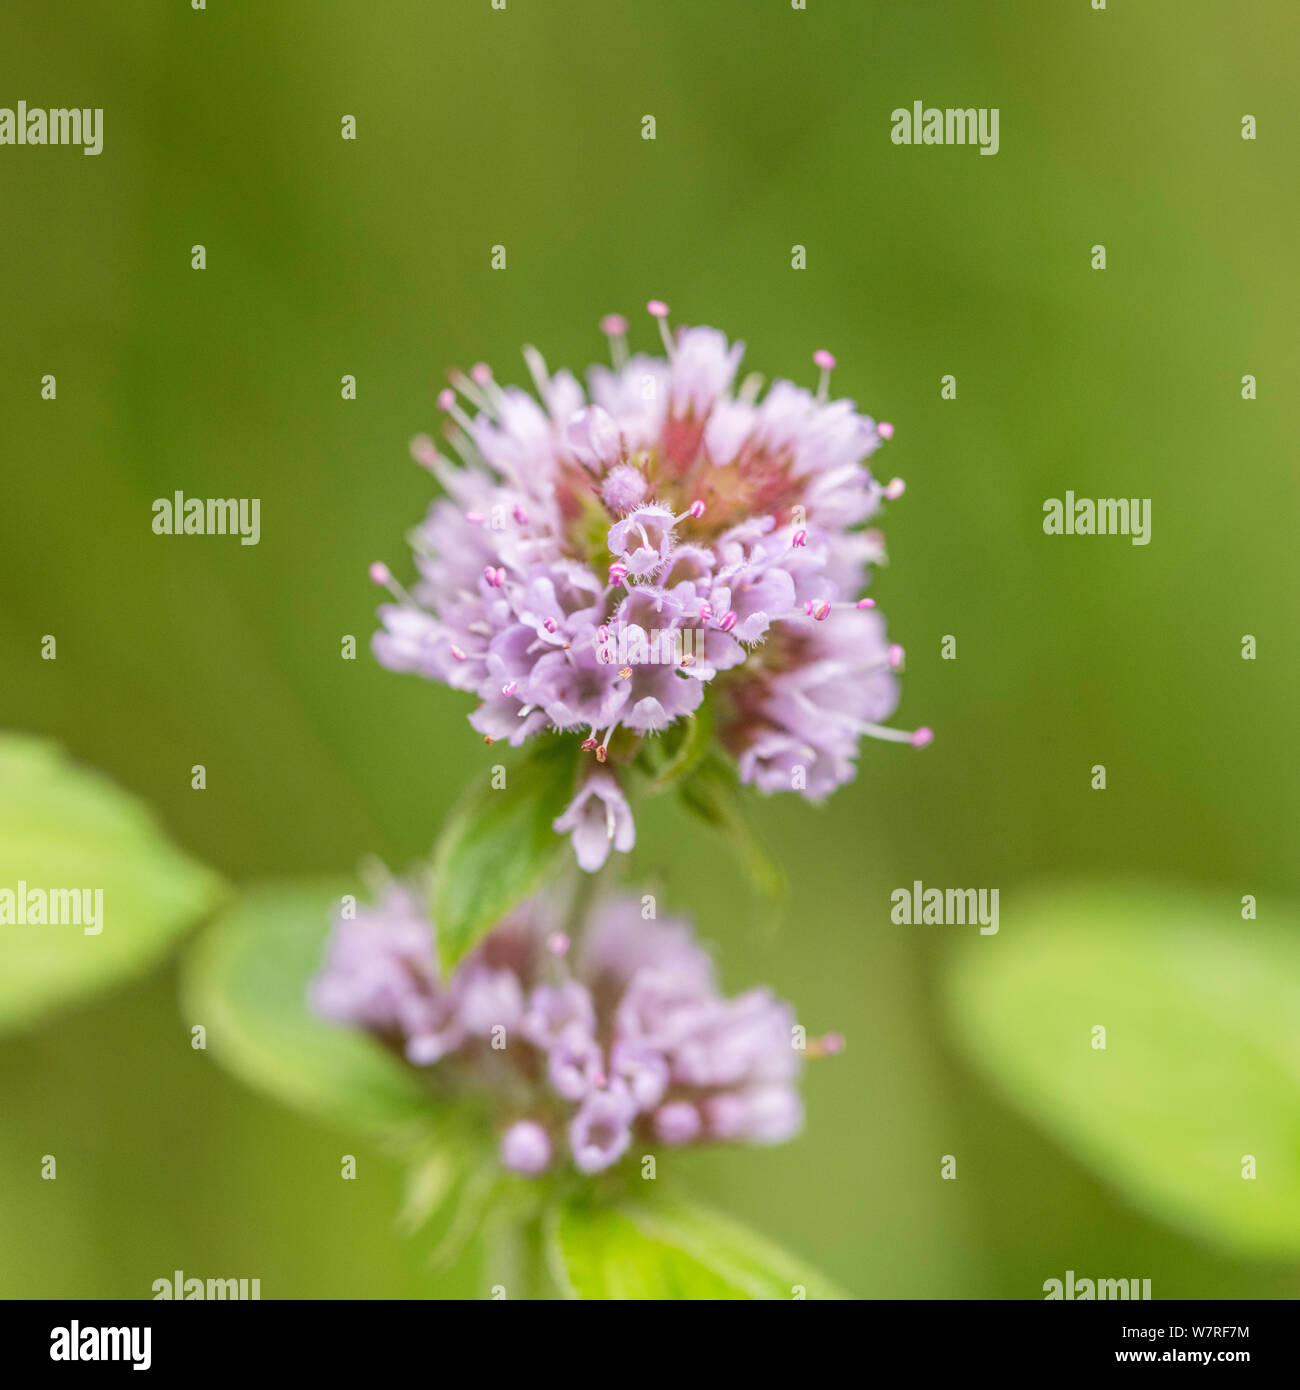 Flowers of Water Mint / Mentha aquatica growing in a wet meadow. Hygrophilous plants concept. Stock Photo